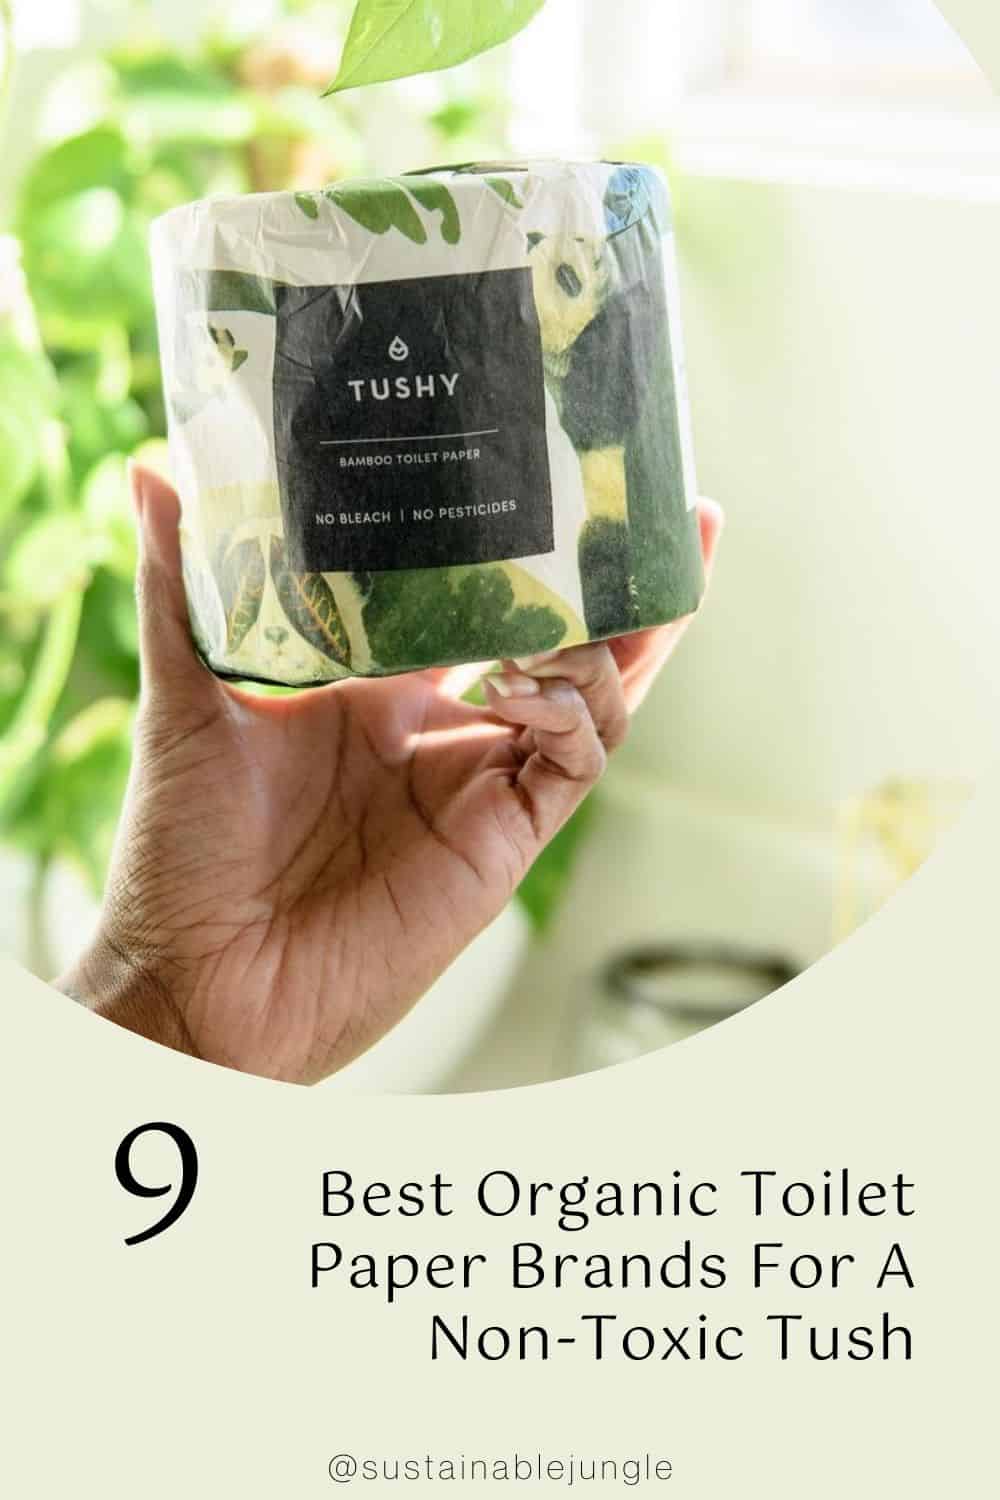 9 Best Organic Toilet Paper Brands For A Non-Toxic Tush Image by Tushy #organictoiletpaper #bestorganictoiletpaper #nontoxictoiletpaper #chemicalfreetoiletpaper #nontoxictoiletpaperbrands #organicbambootoiletpaper #sustainablejungle